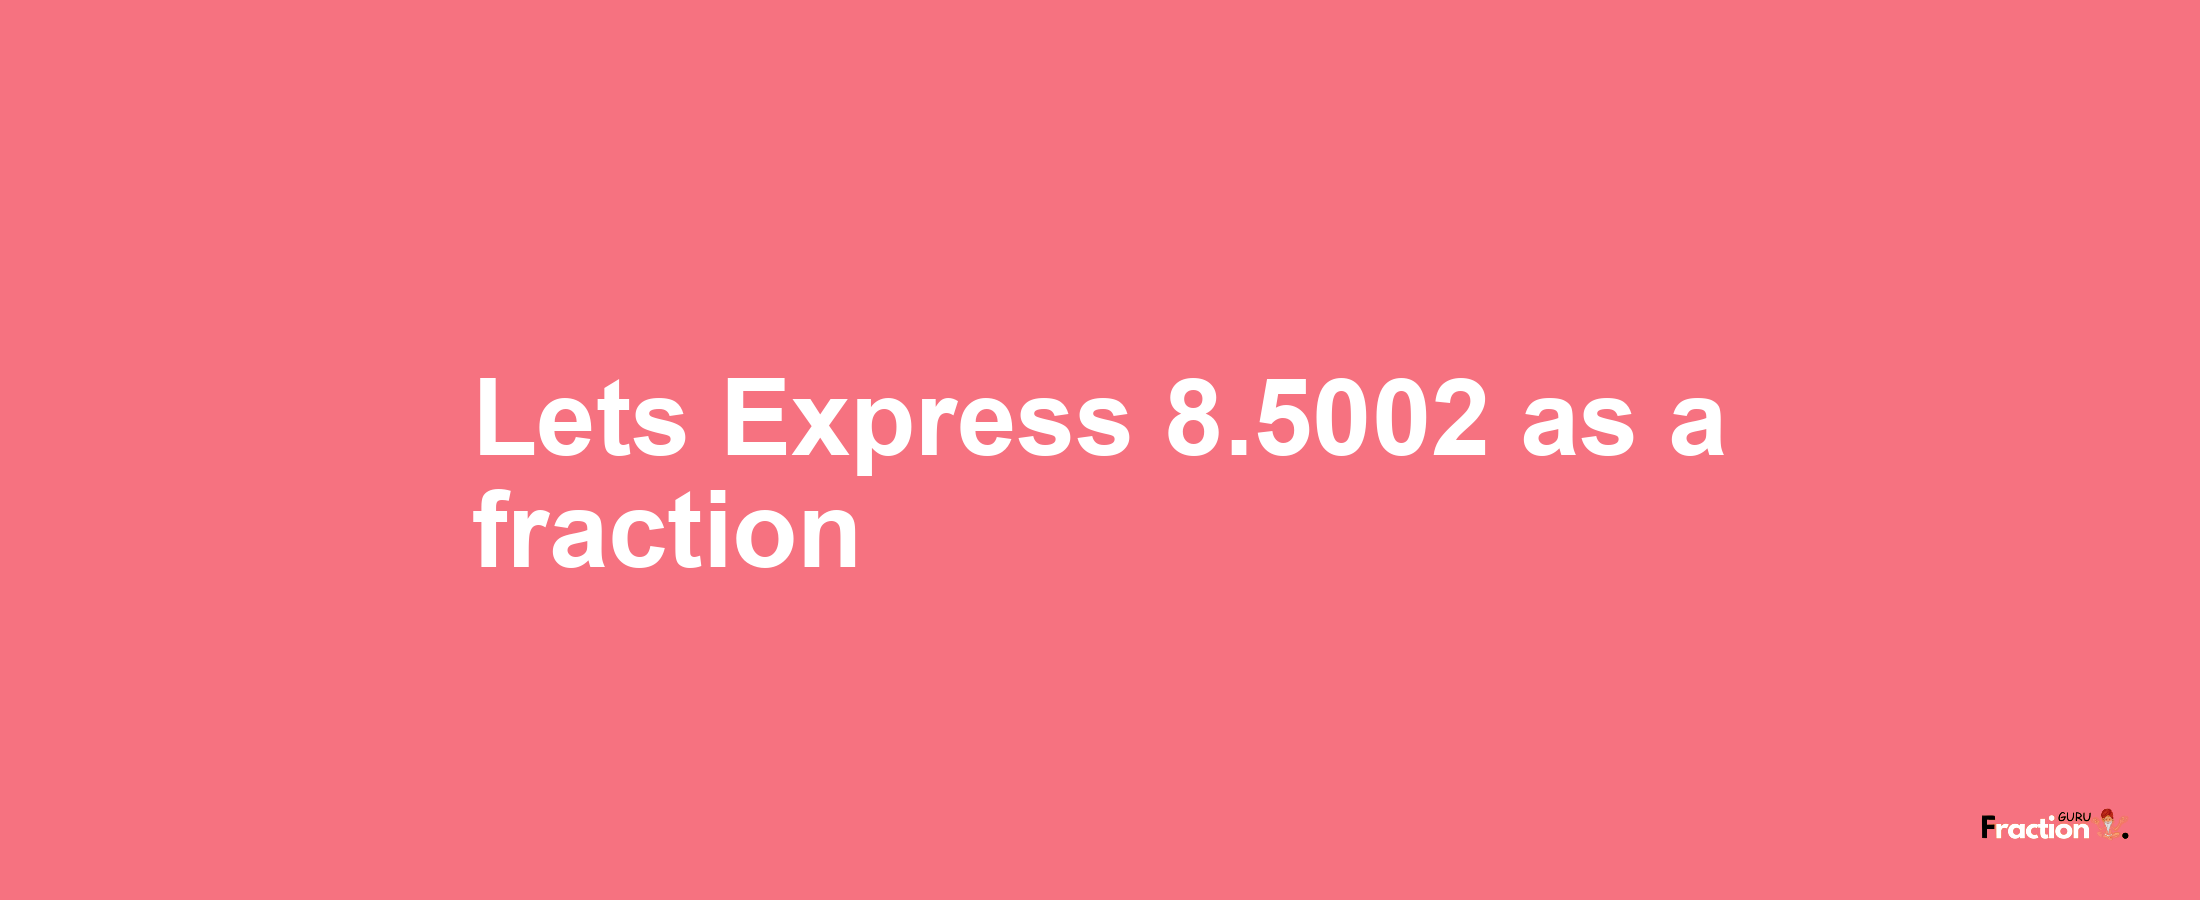 Lets Express 8.5002 as afraction